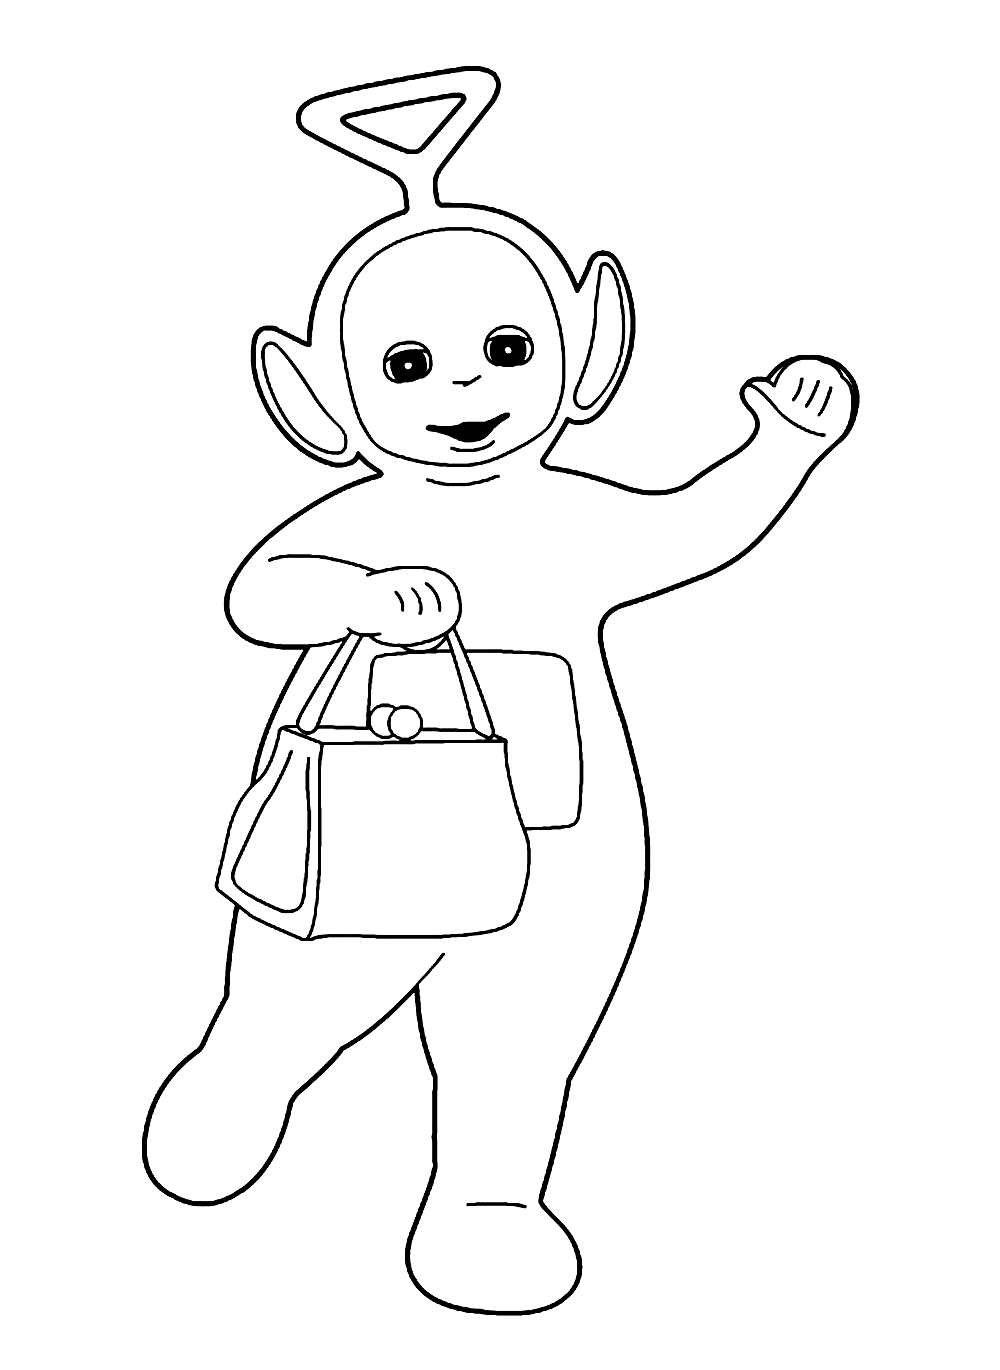 Tinky Winky Teletubbies Coloring Page